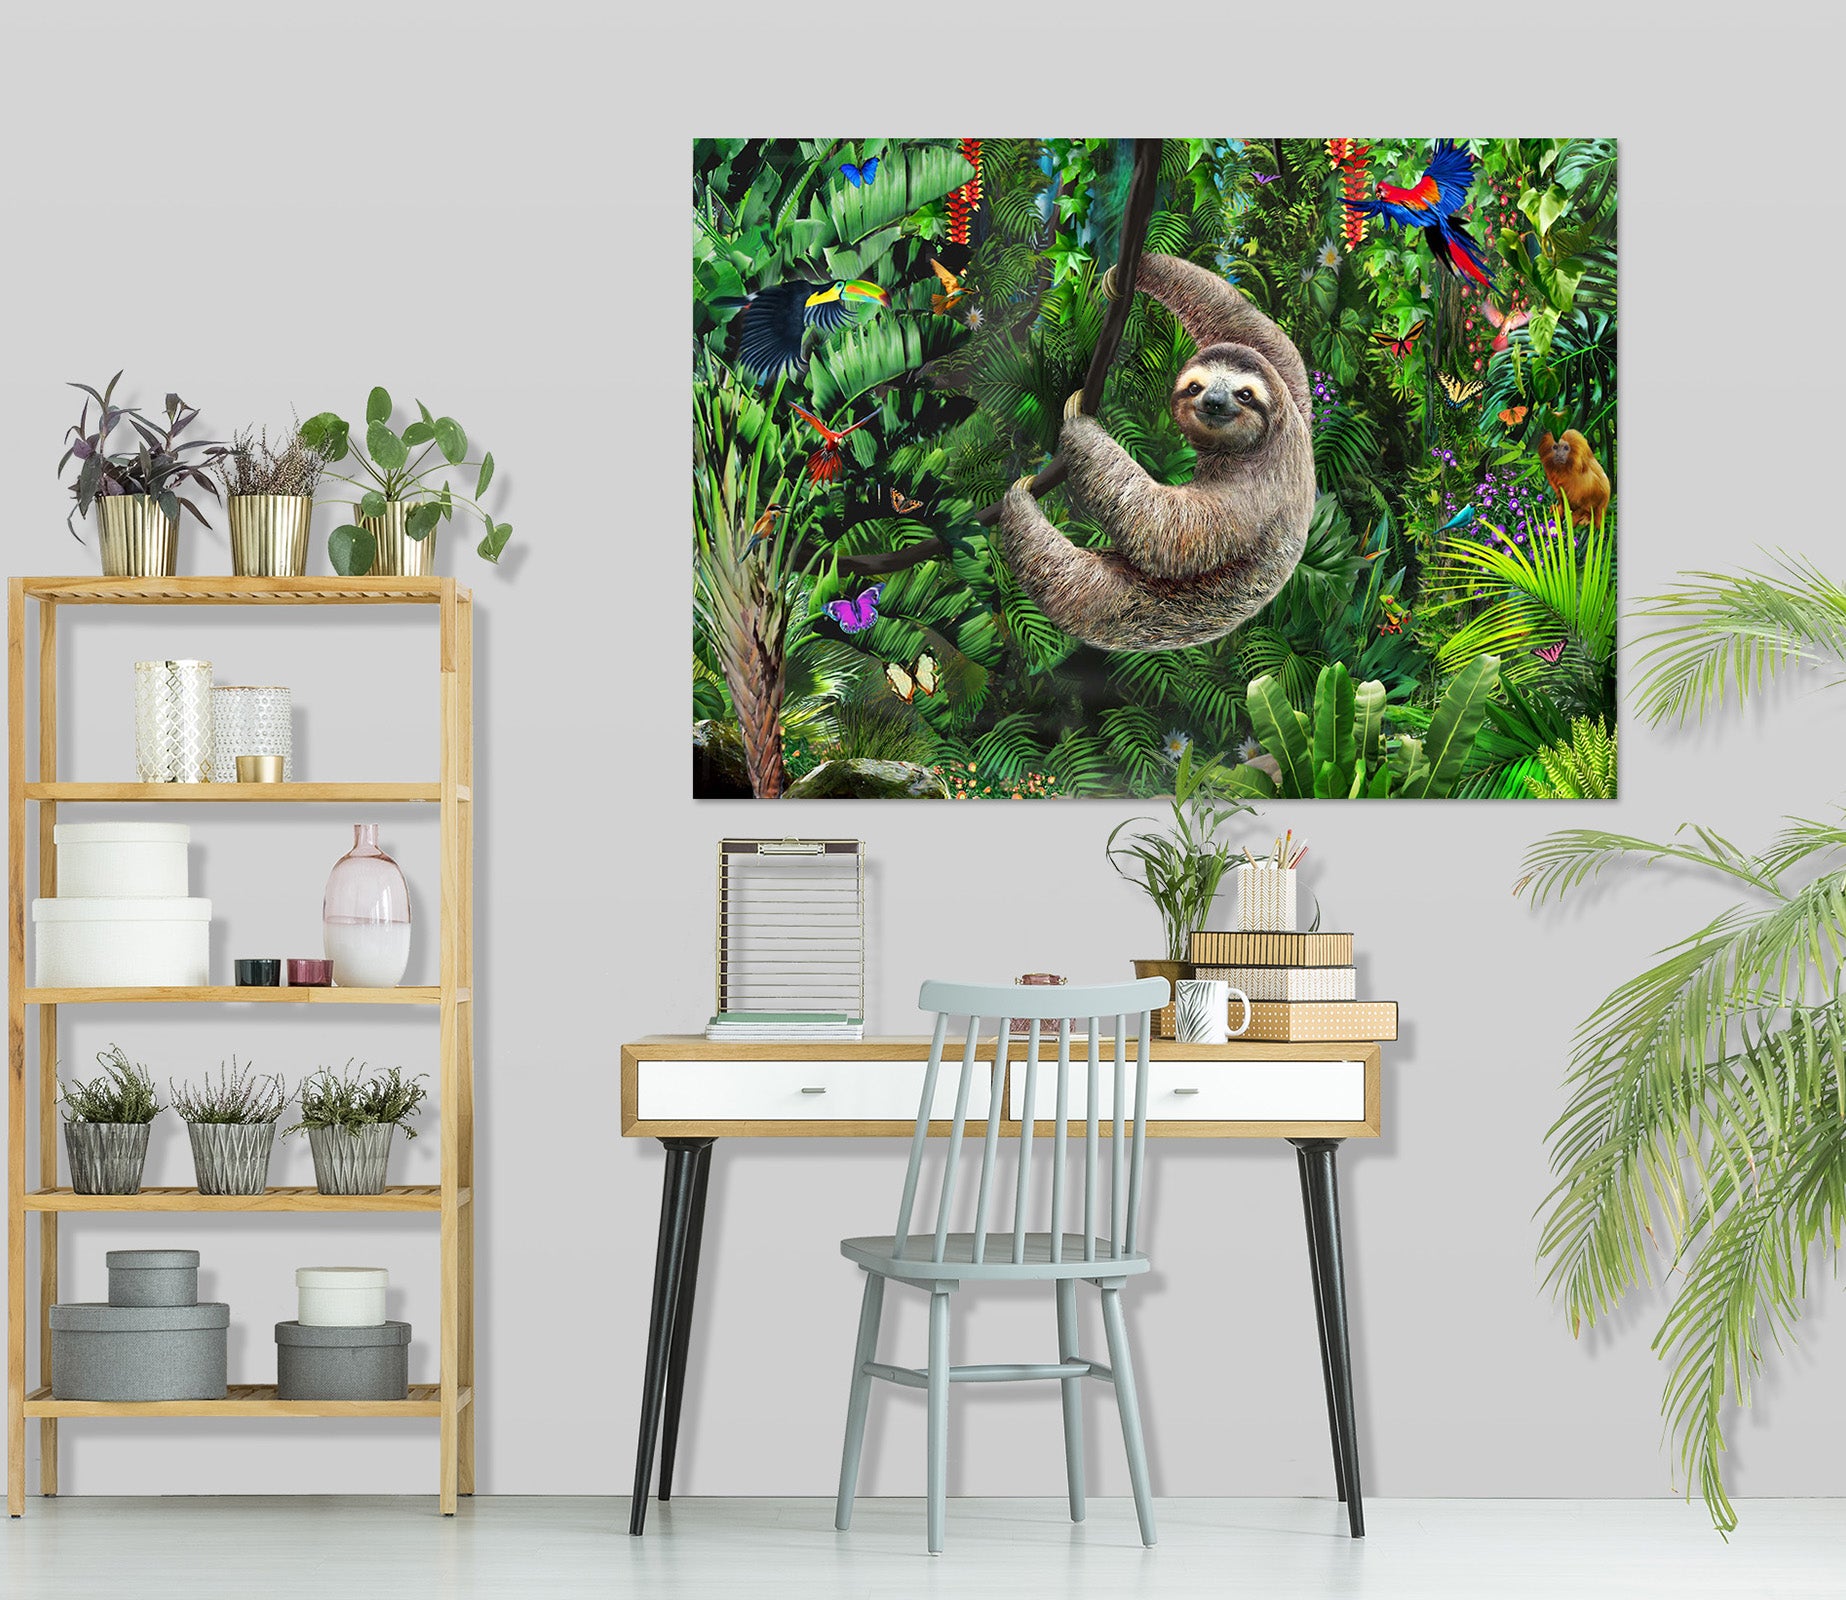 3D Forest Sloth 019 Adrian Chesterman Wall Sticker